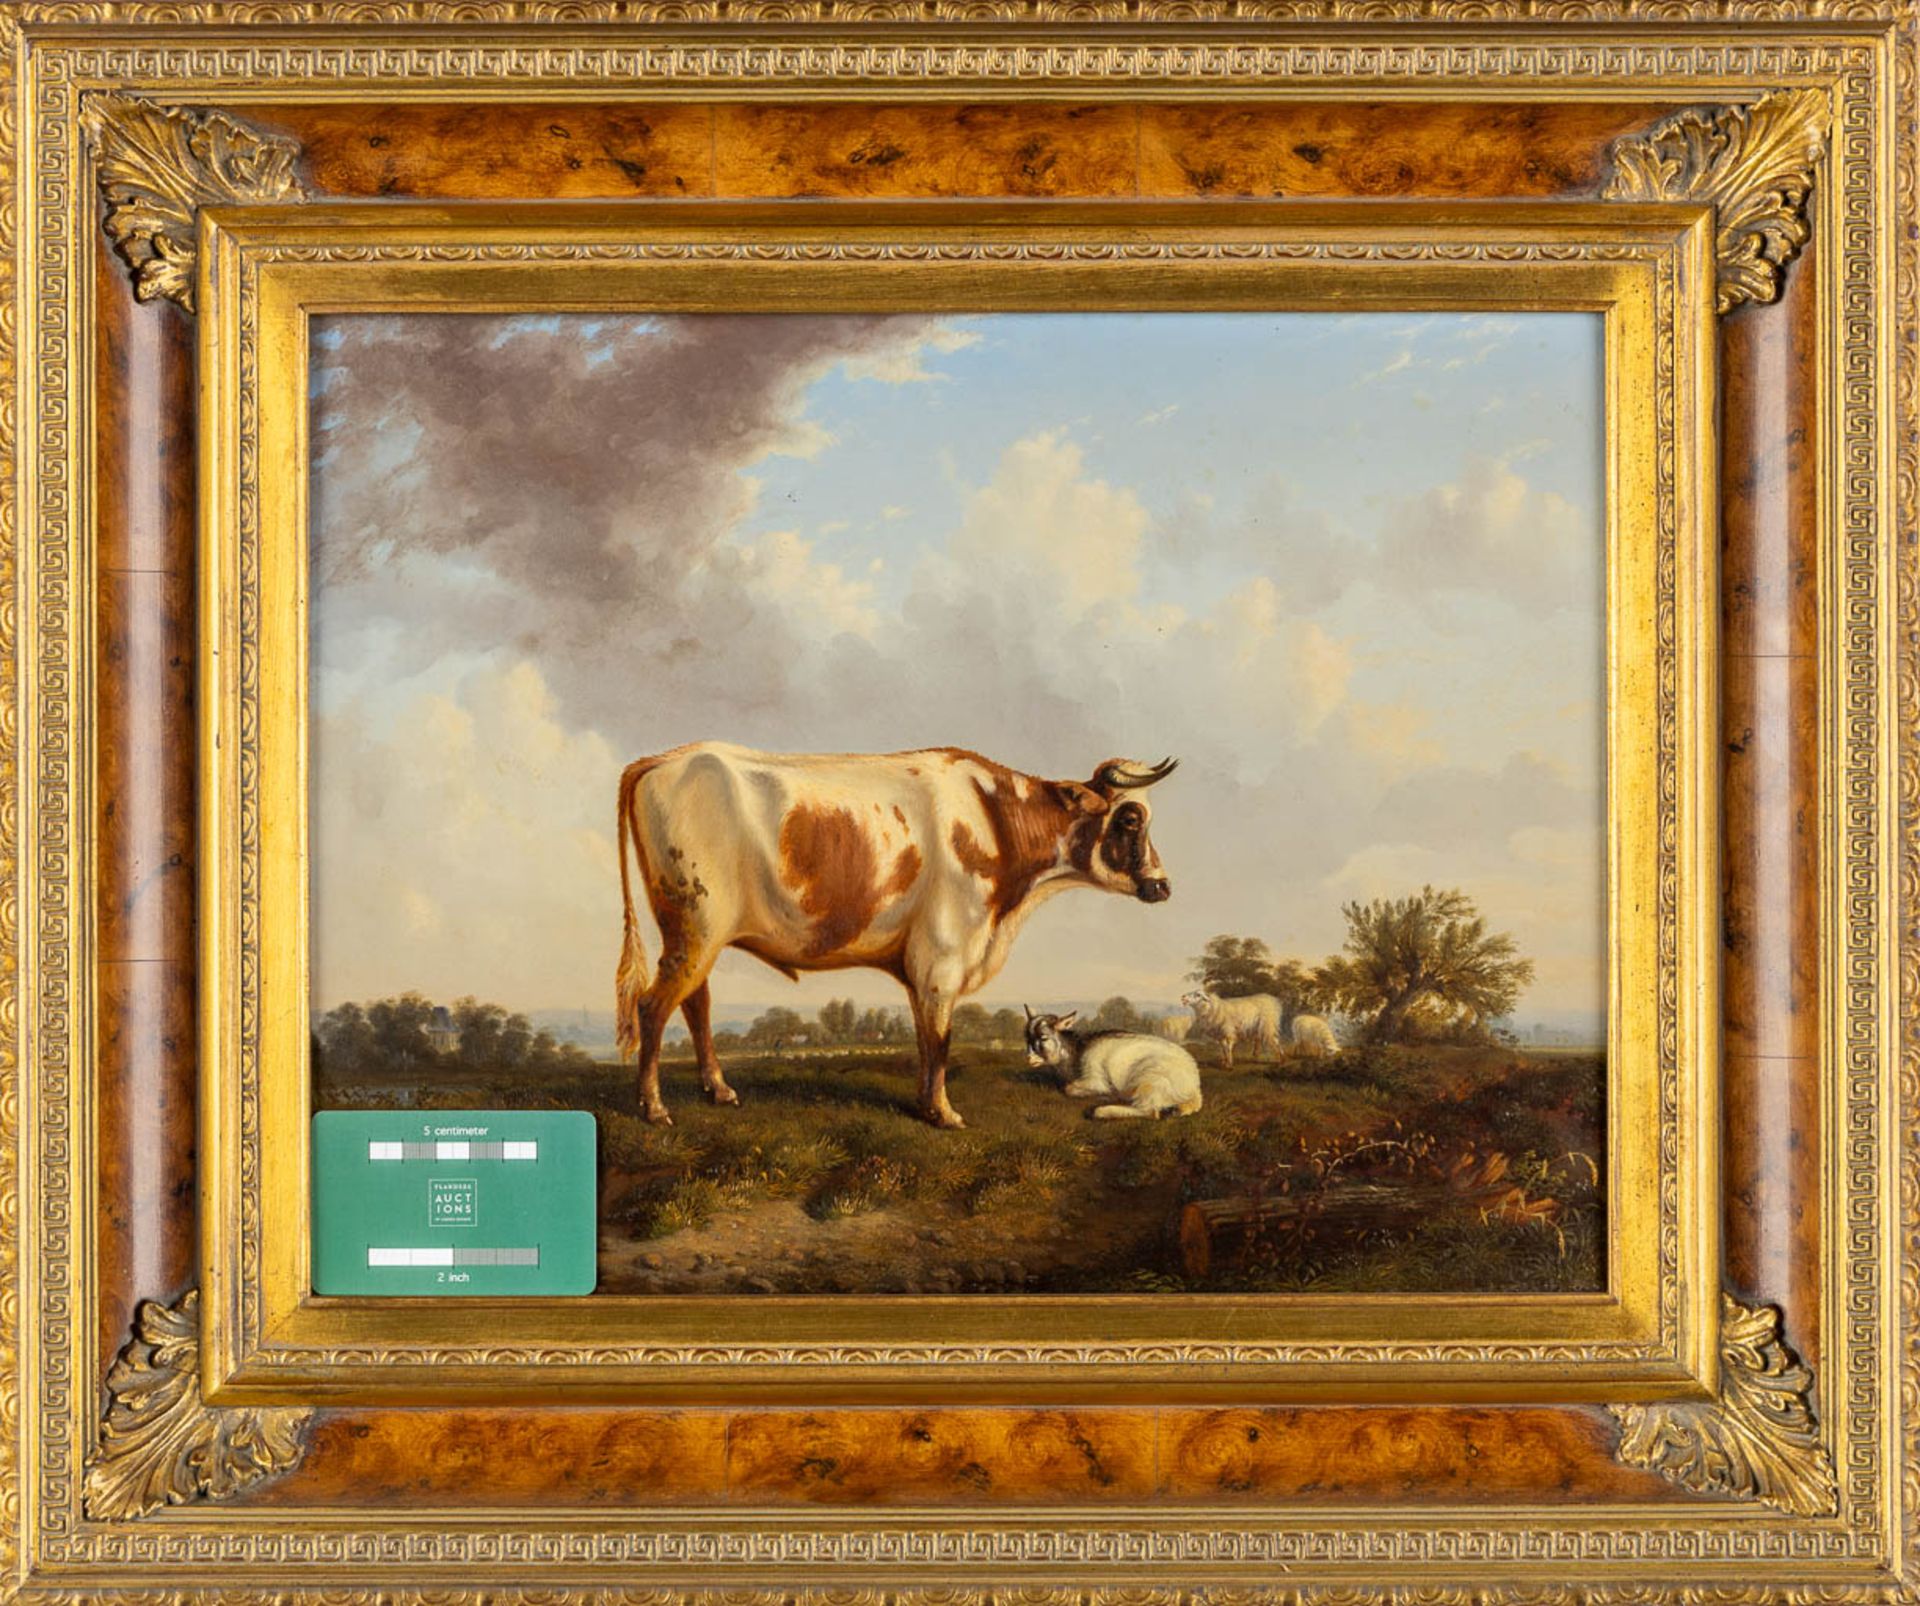 J. VOJAVE (XIX) 'Cow and sheep' oil on a mahogany panel. 1851. (W:40 x H:30,5 cm) - Image 2 of 9